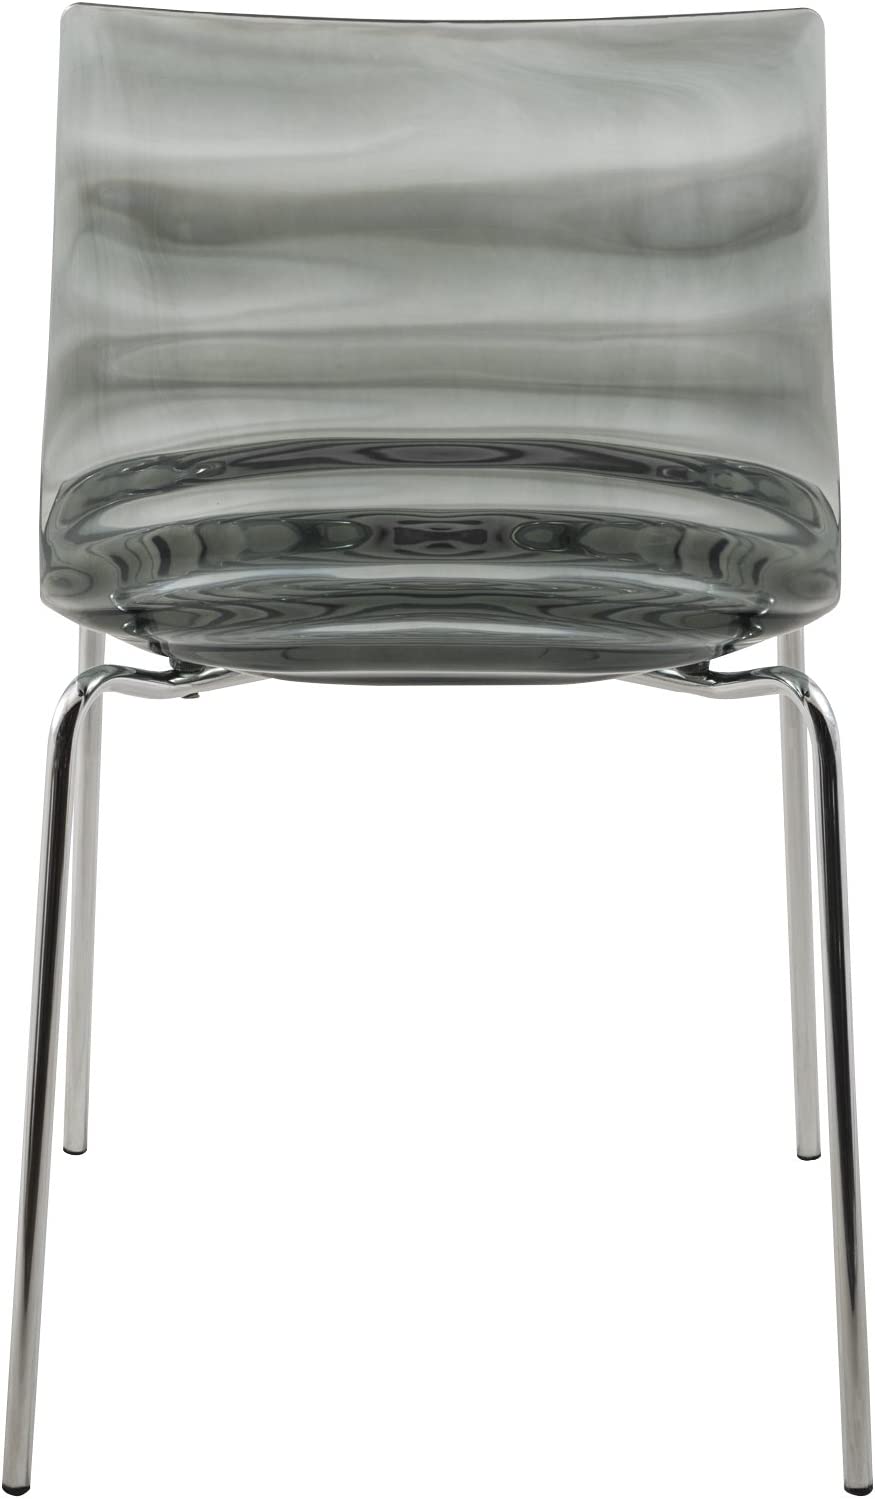 LeisureMod Astor Water Ripple Design Modern Lucite Dining Side Chair with Metal Legs, Transparent Black